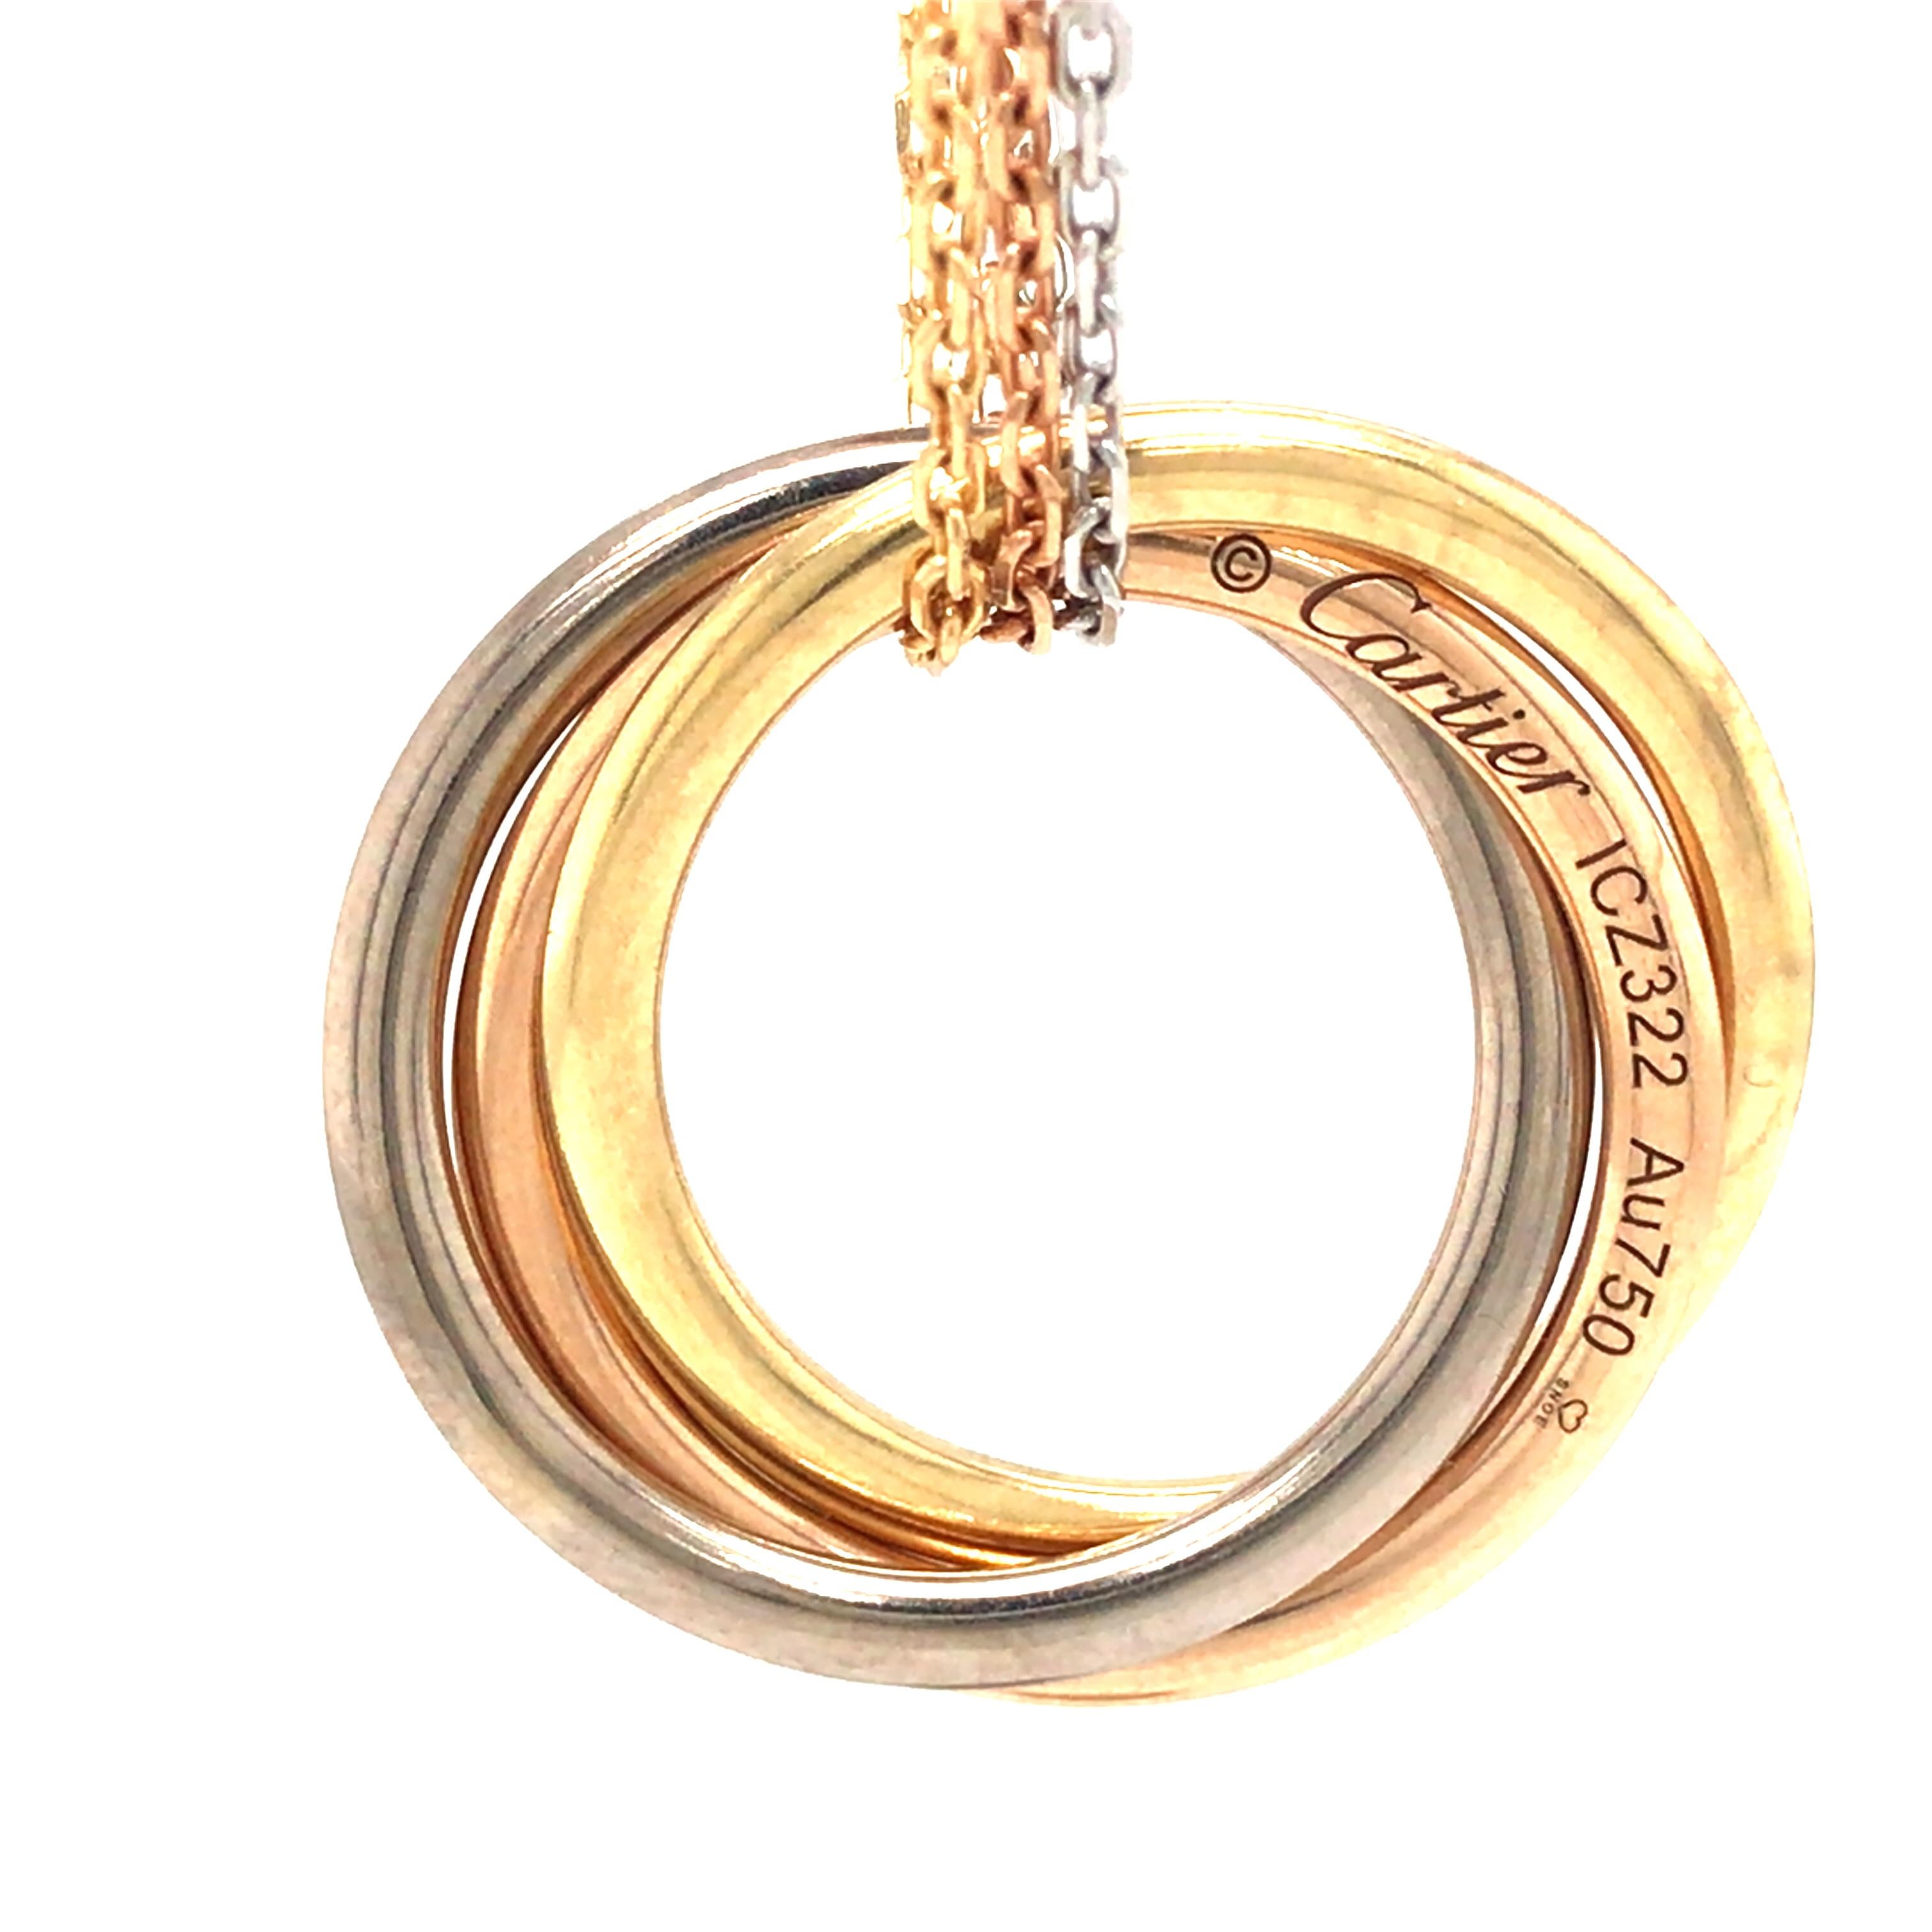 Cartier 18K Tri-Gold Trinity Pendant Necklace.  The Chain measures 35 inch in length.  The Trinity Pendant measures 1 inch in diameter.  27.68 grams.  Pendant stamped 